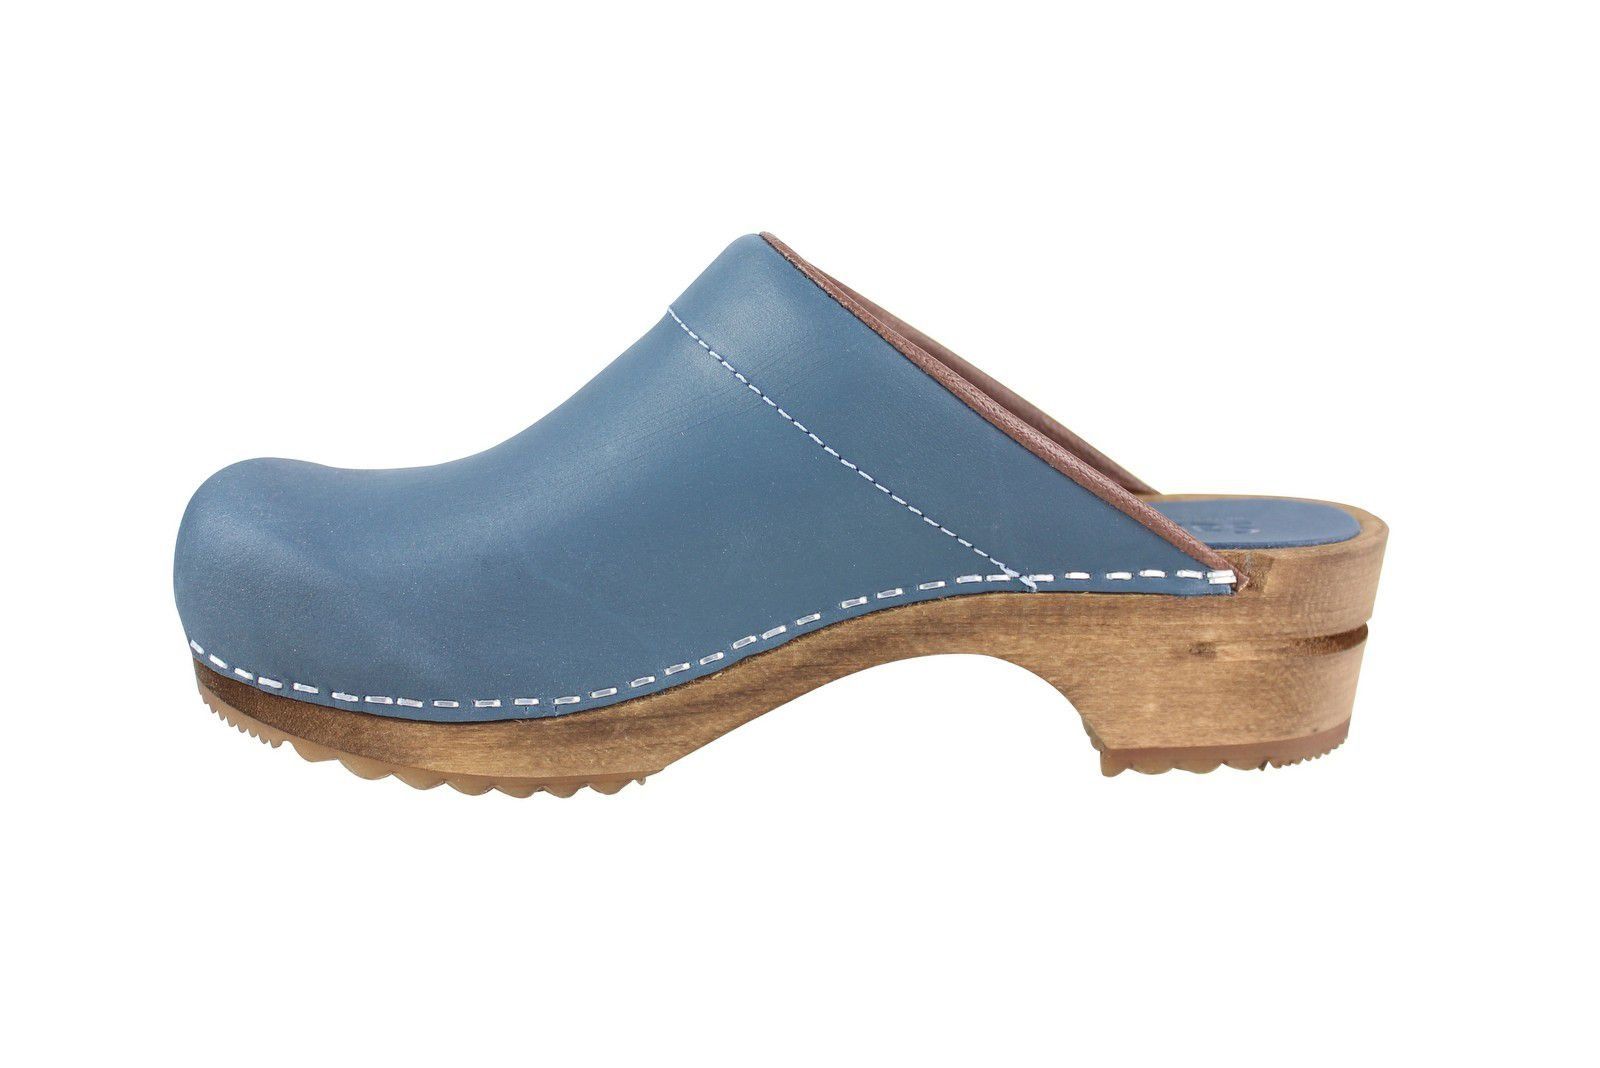 Sanita Chrissy Blue in Oiled Leather. Article 1200009